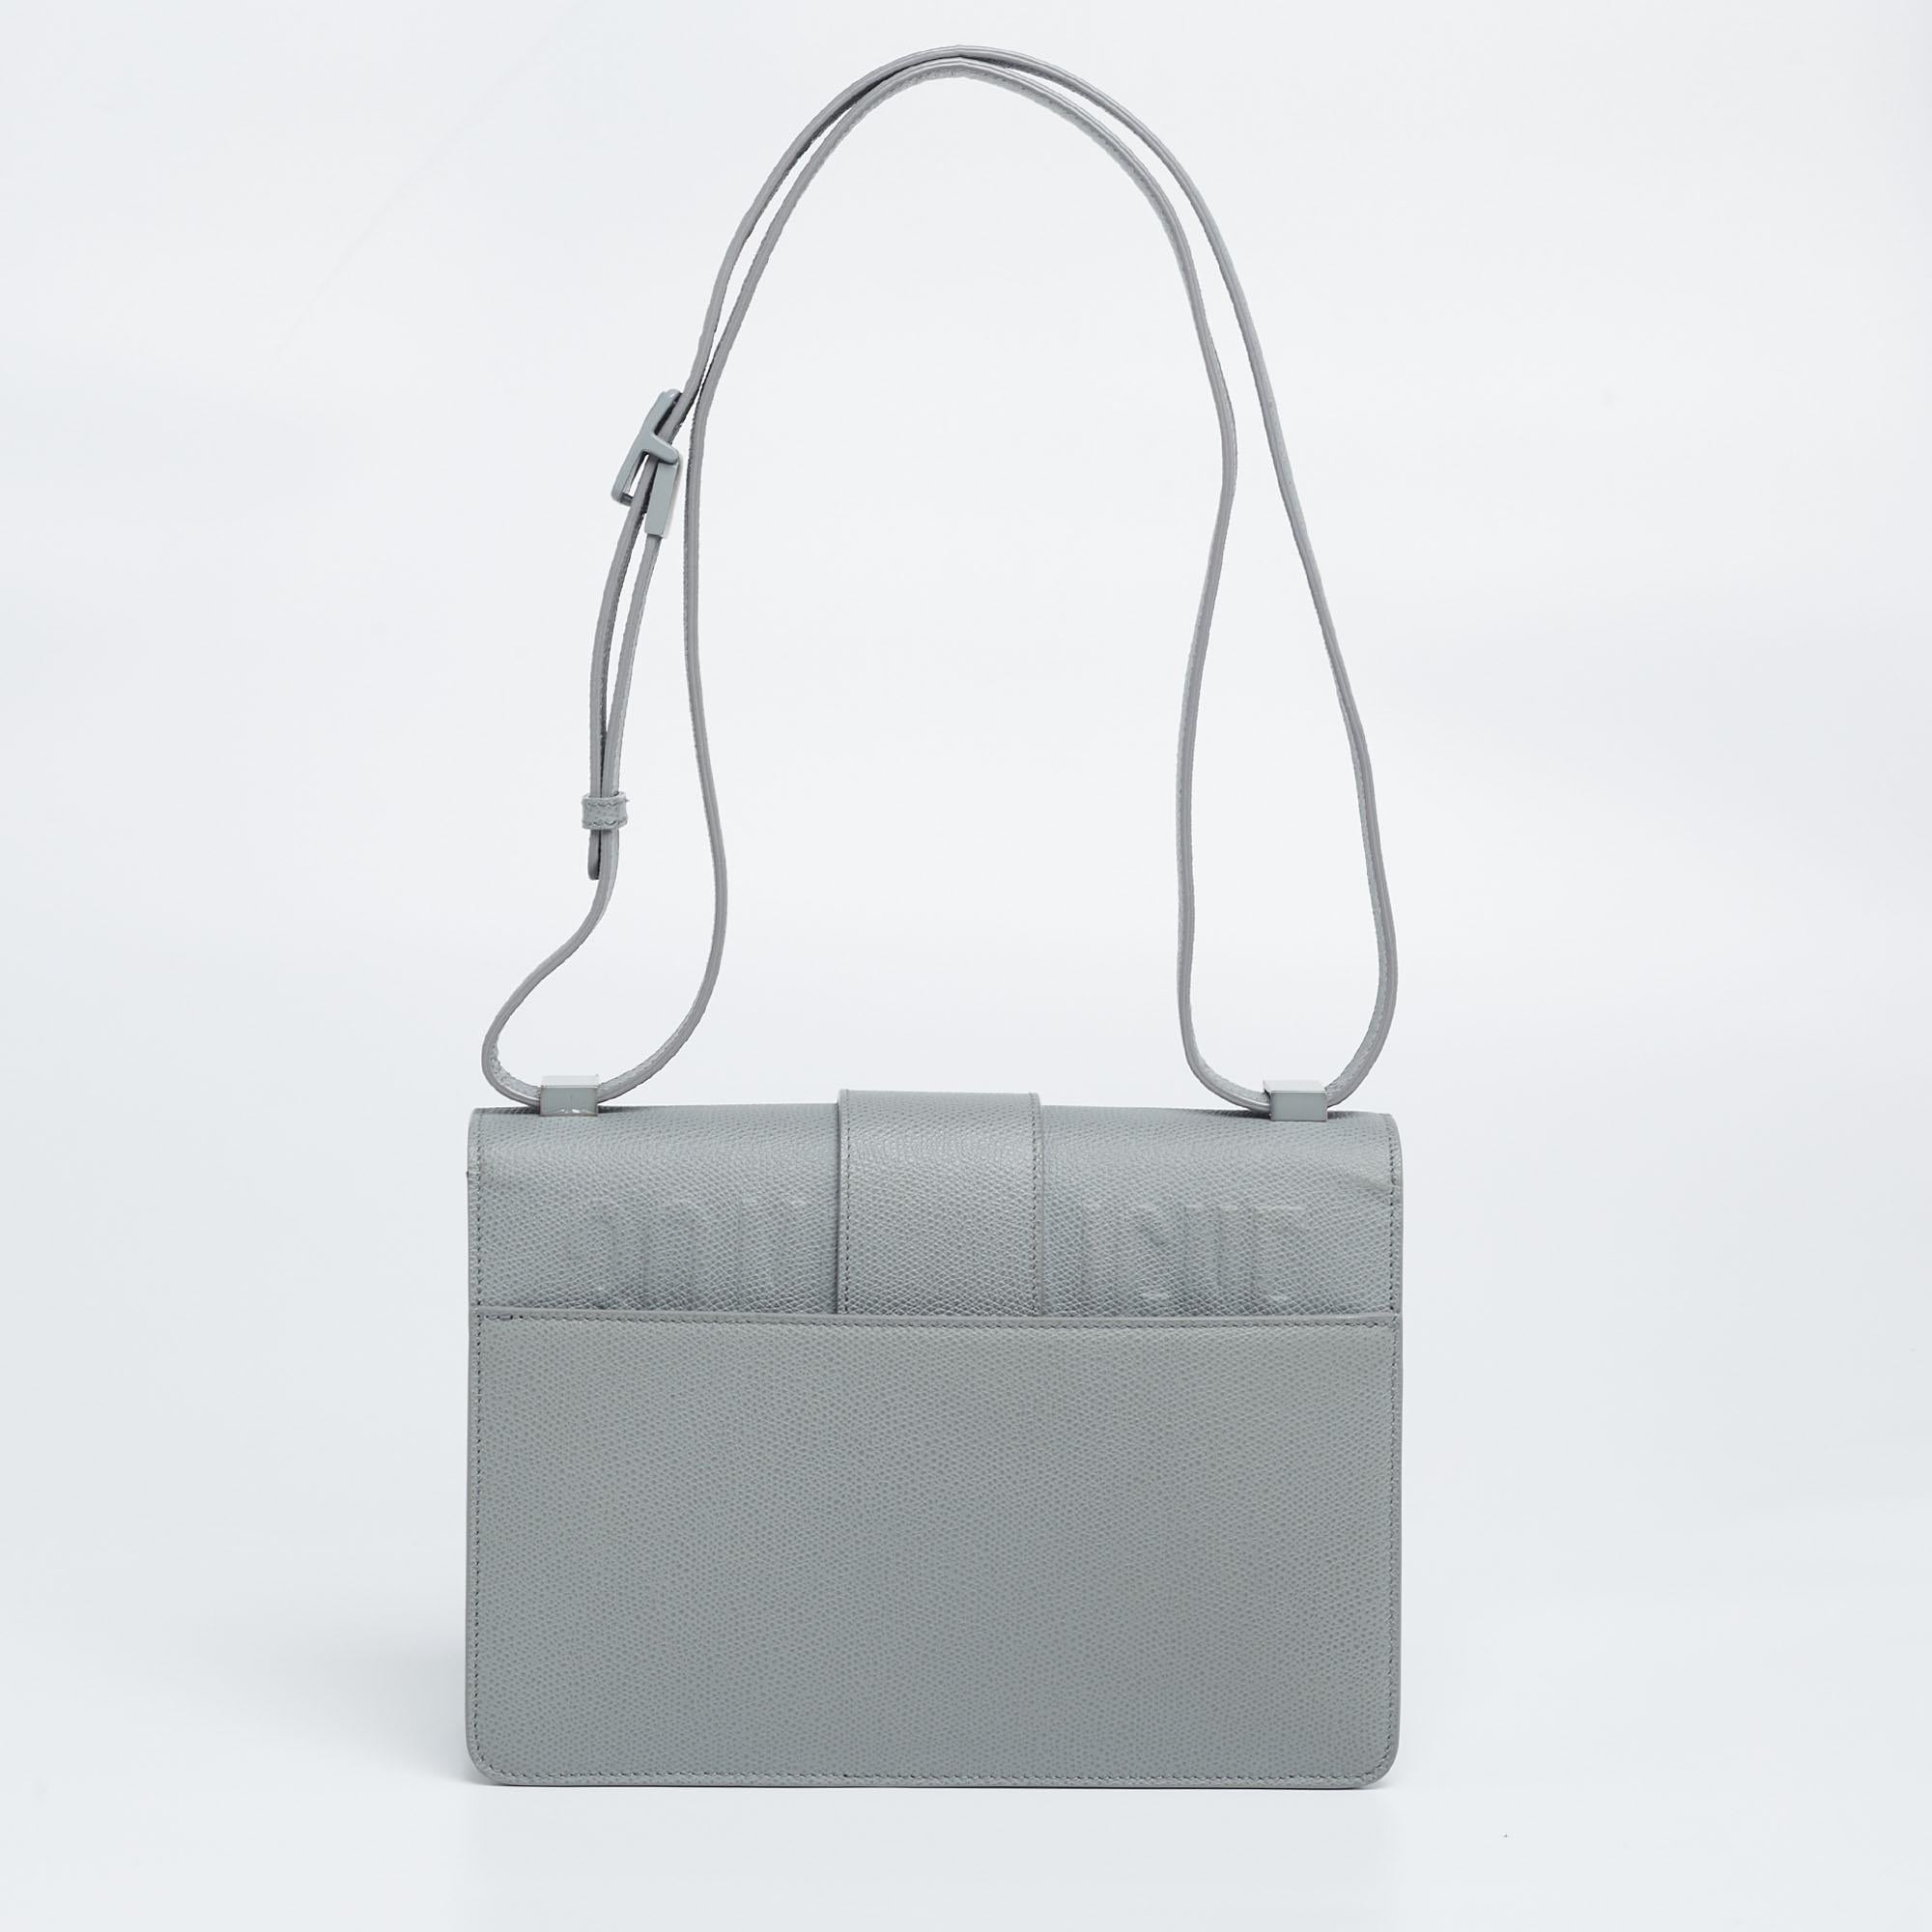 A fine collaboration of historical inspiration, artisanal savoir-faire, and signature brand aesthetic, this 30 Montaigne bag from Dior is a creation brimming with excellence and allure. This version displays a grey ultramatte leather exterior with a